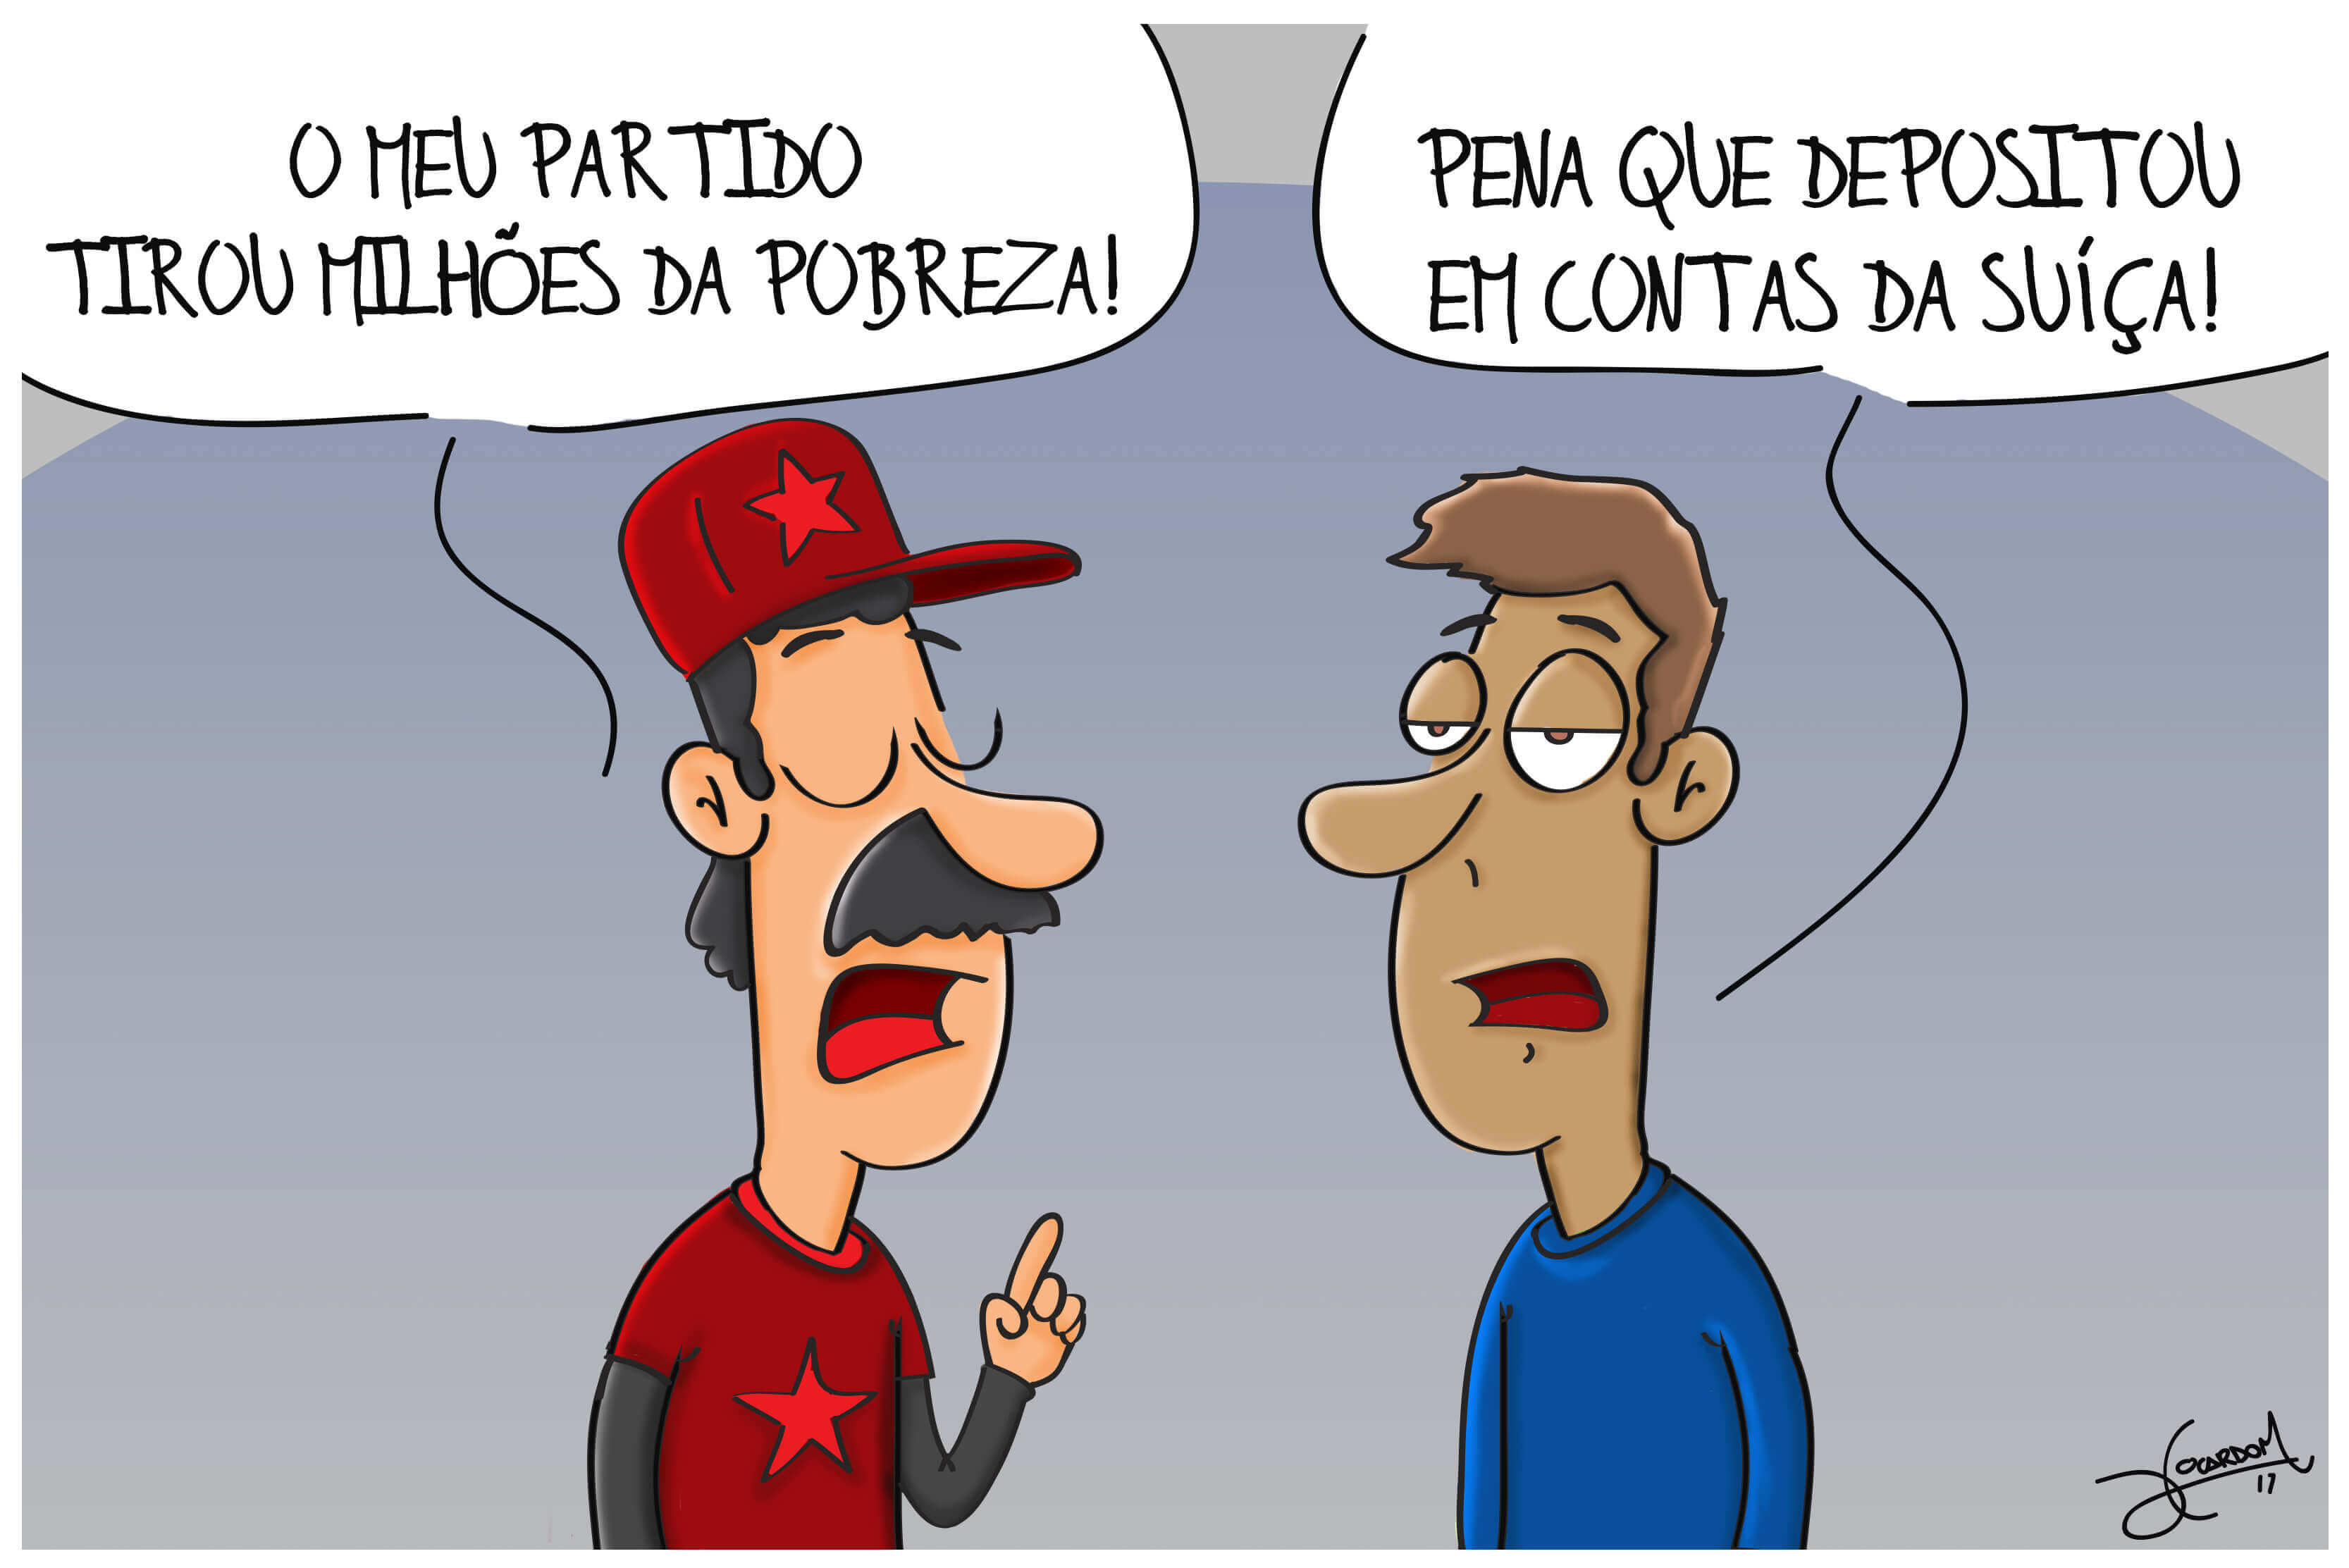 Charge: psdb.org.br